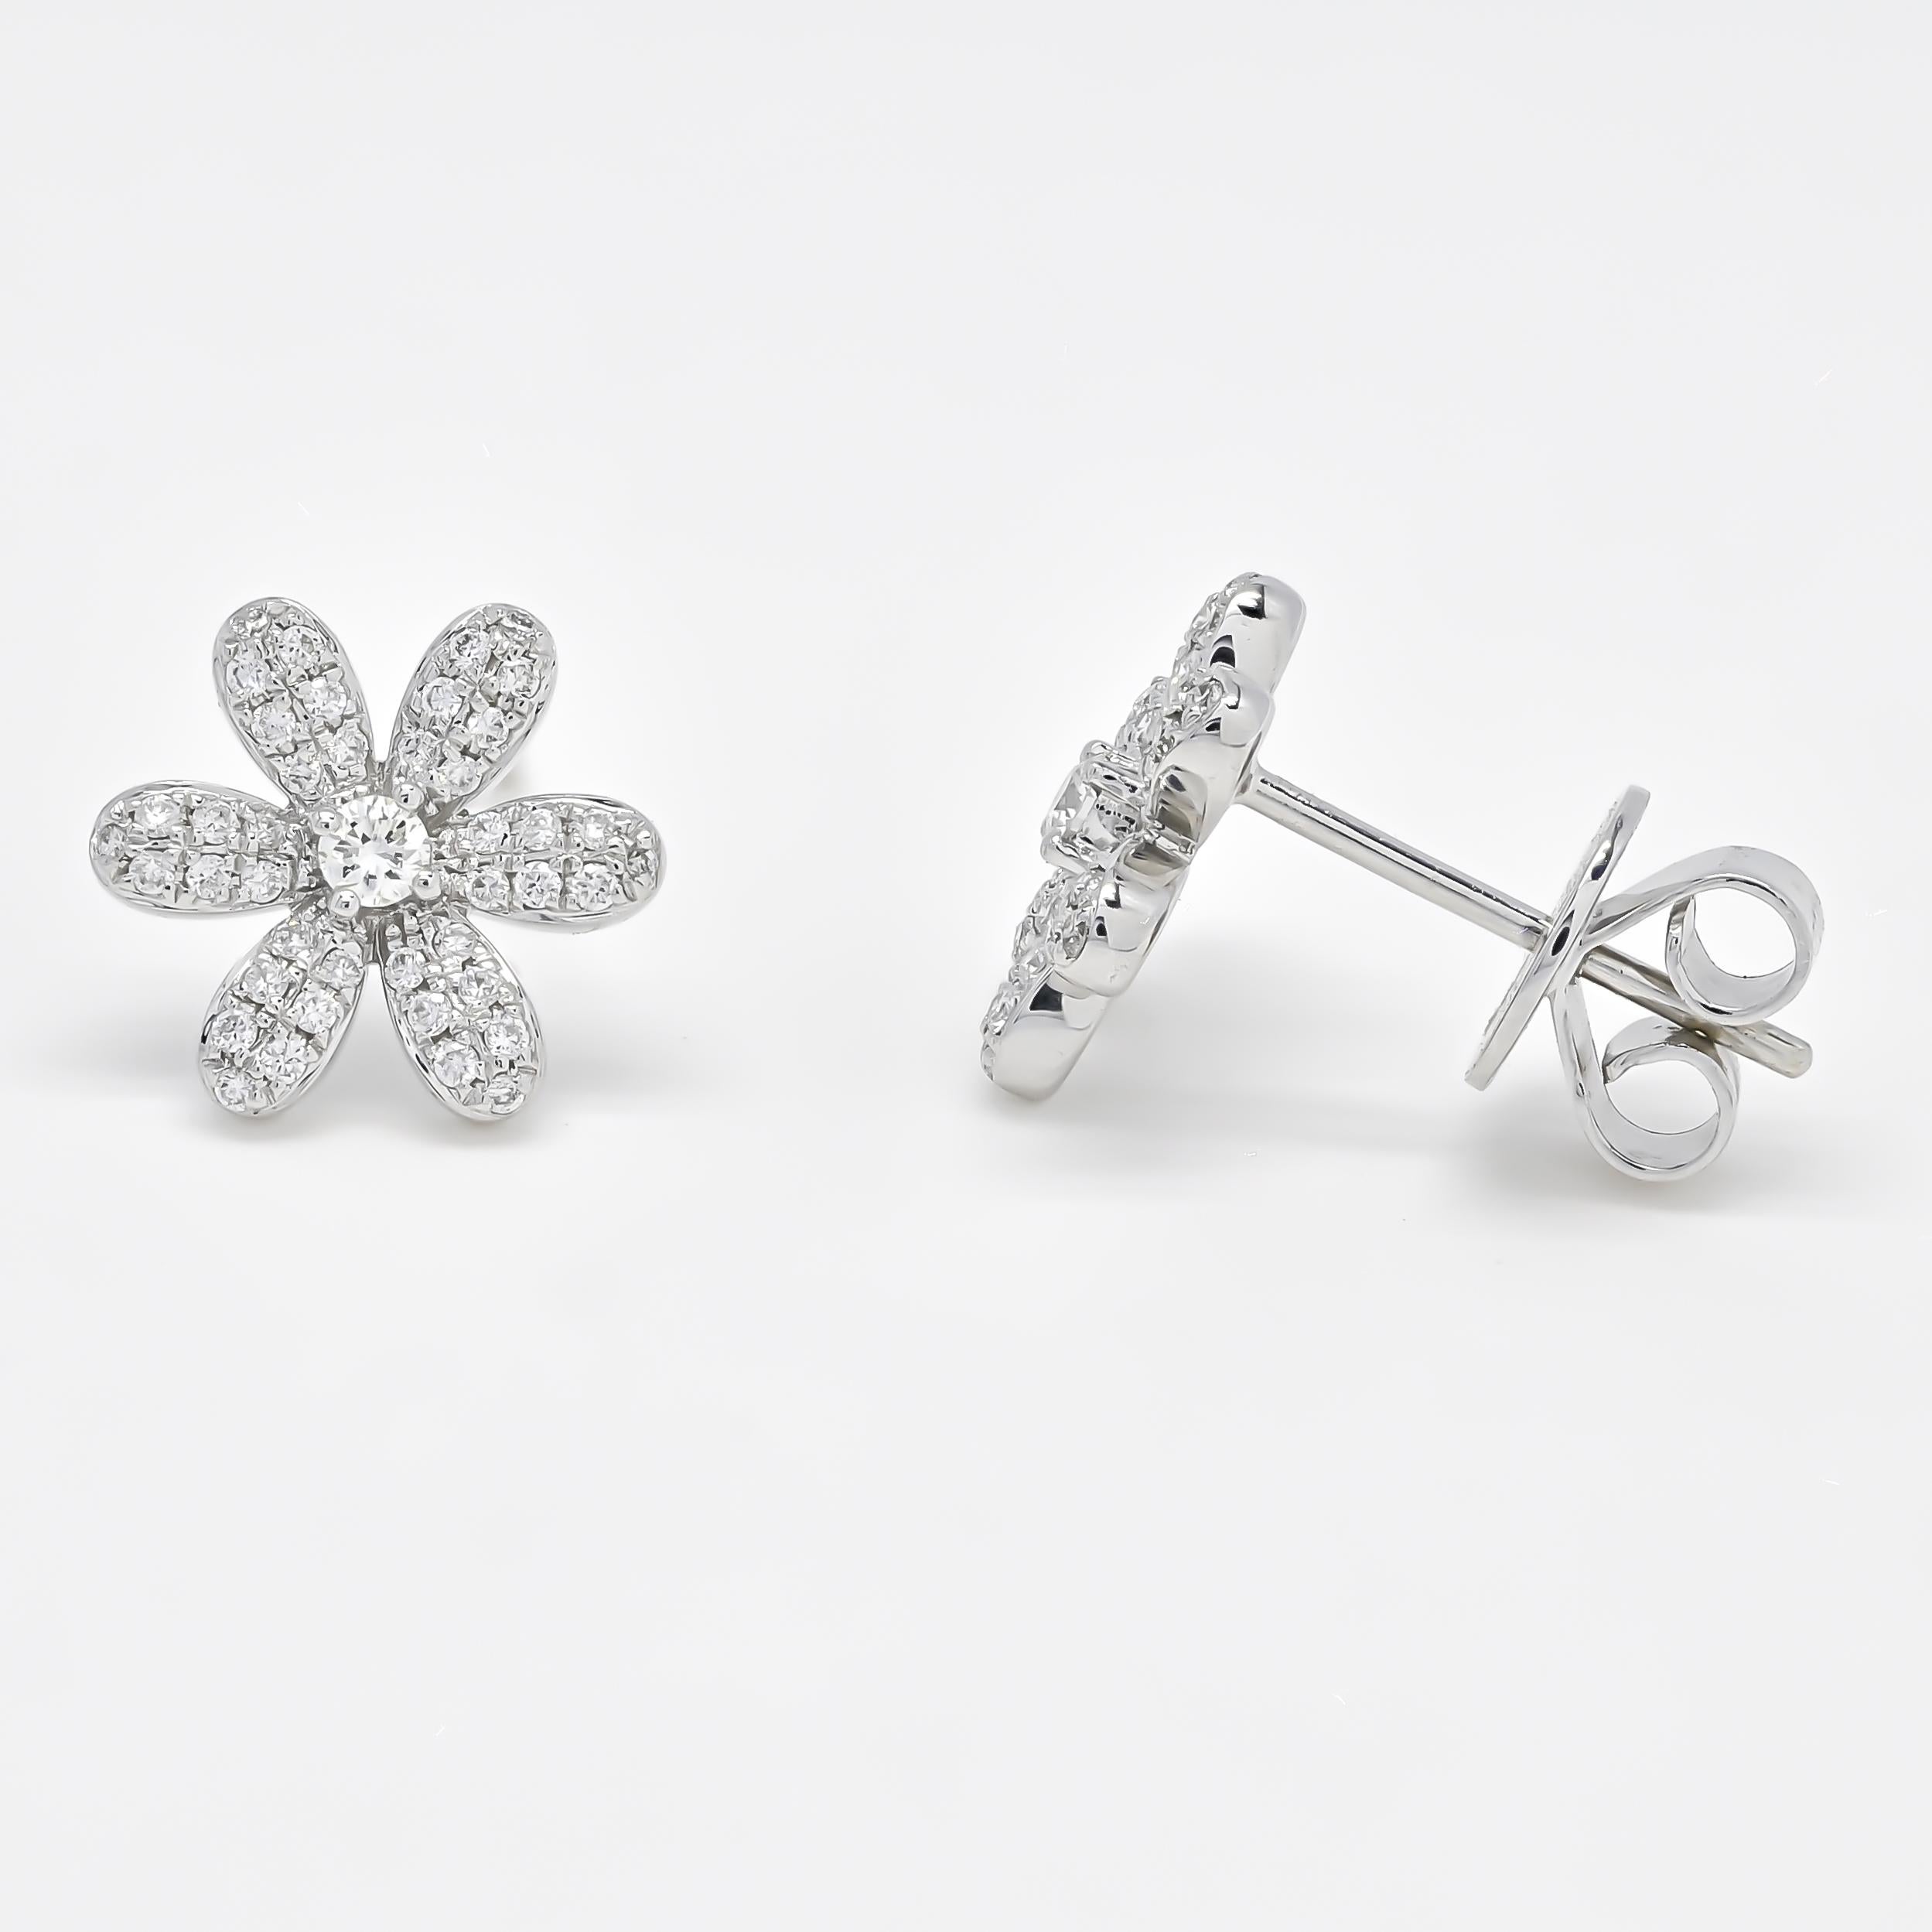 lluminate your style with the subtle brilliance of these exquisite diamond cluster flower stud earrings, crafted from 0.36 carats of diamonds set in elegant 18 Karat White Gold, making them the perfect choice for any occasion. 

The lustrous white